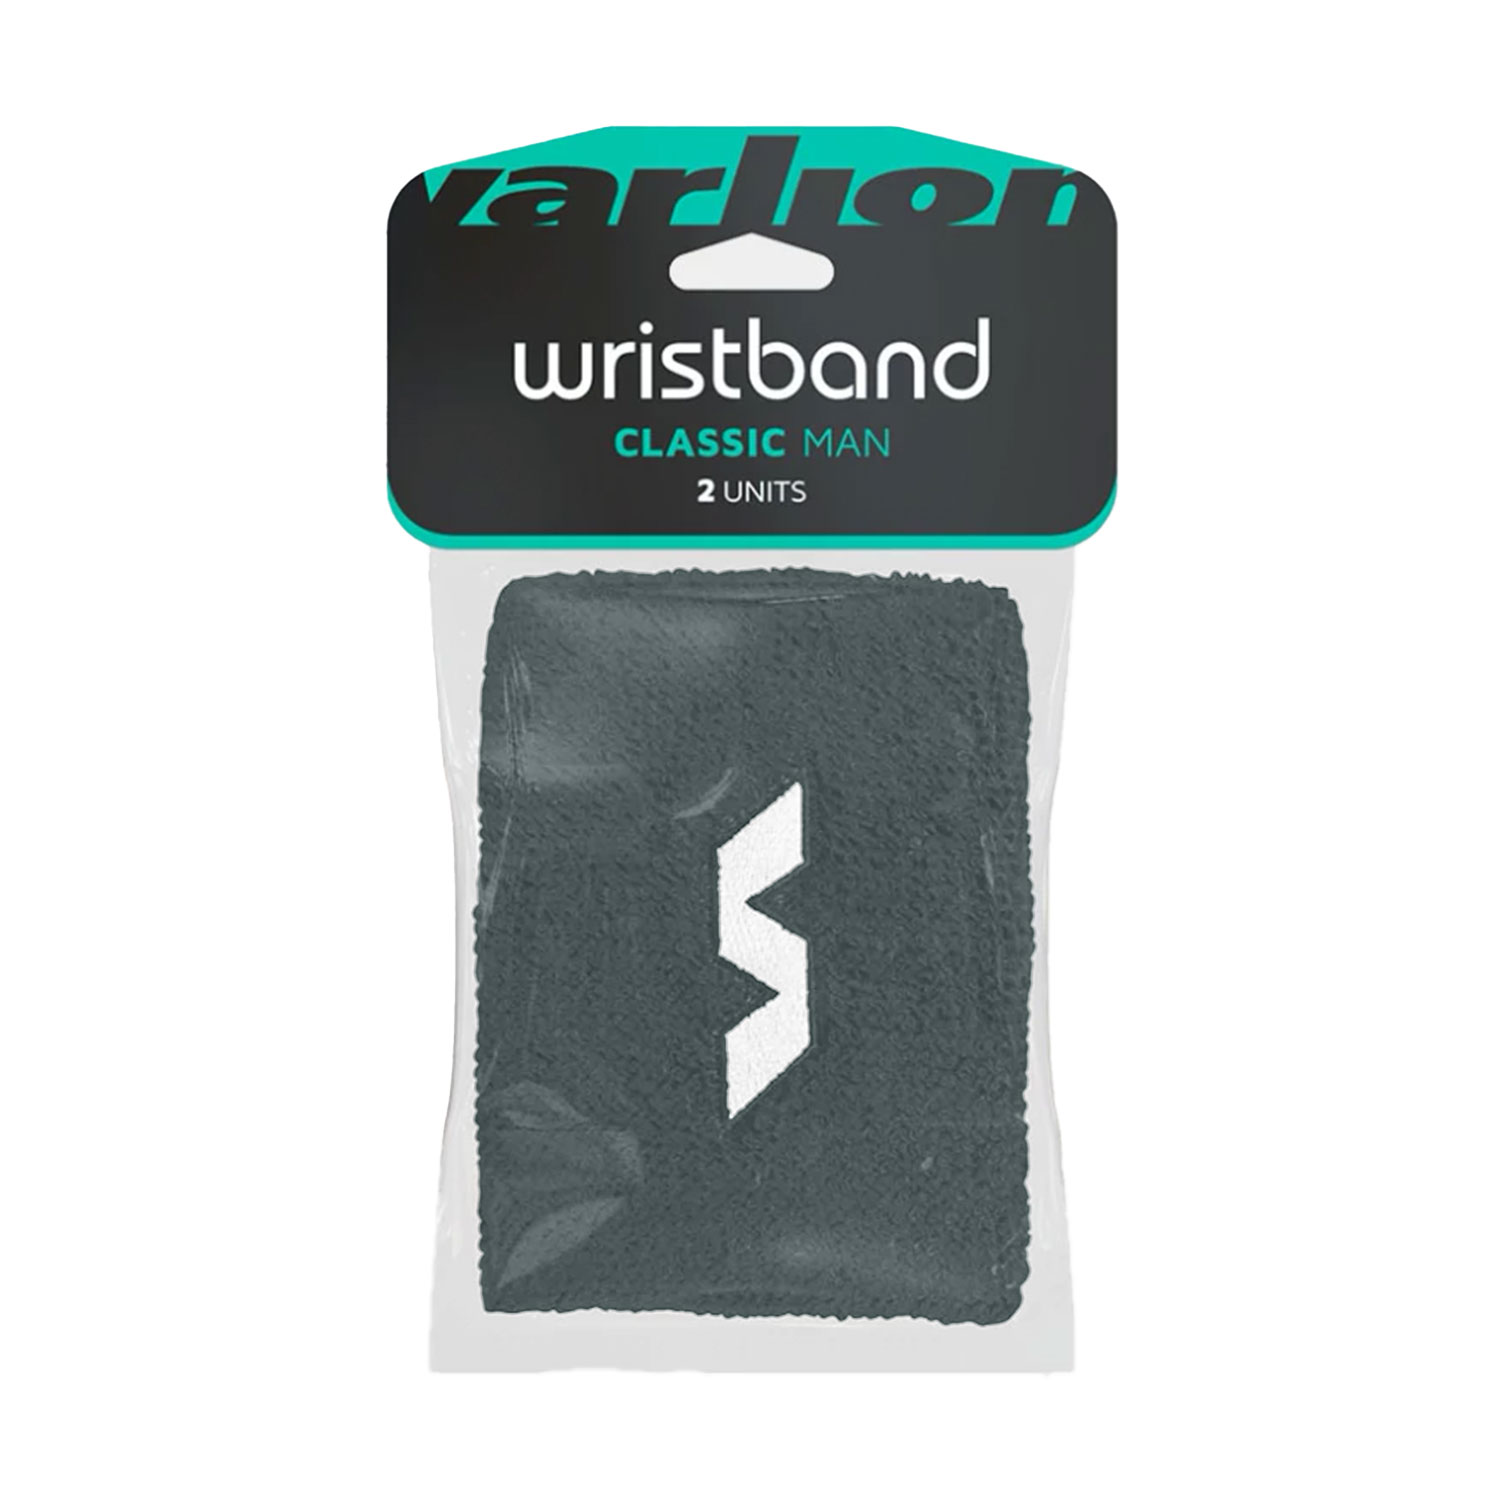 Varlion Classic Small Wristbands - Grey/White